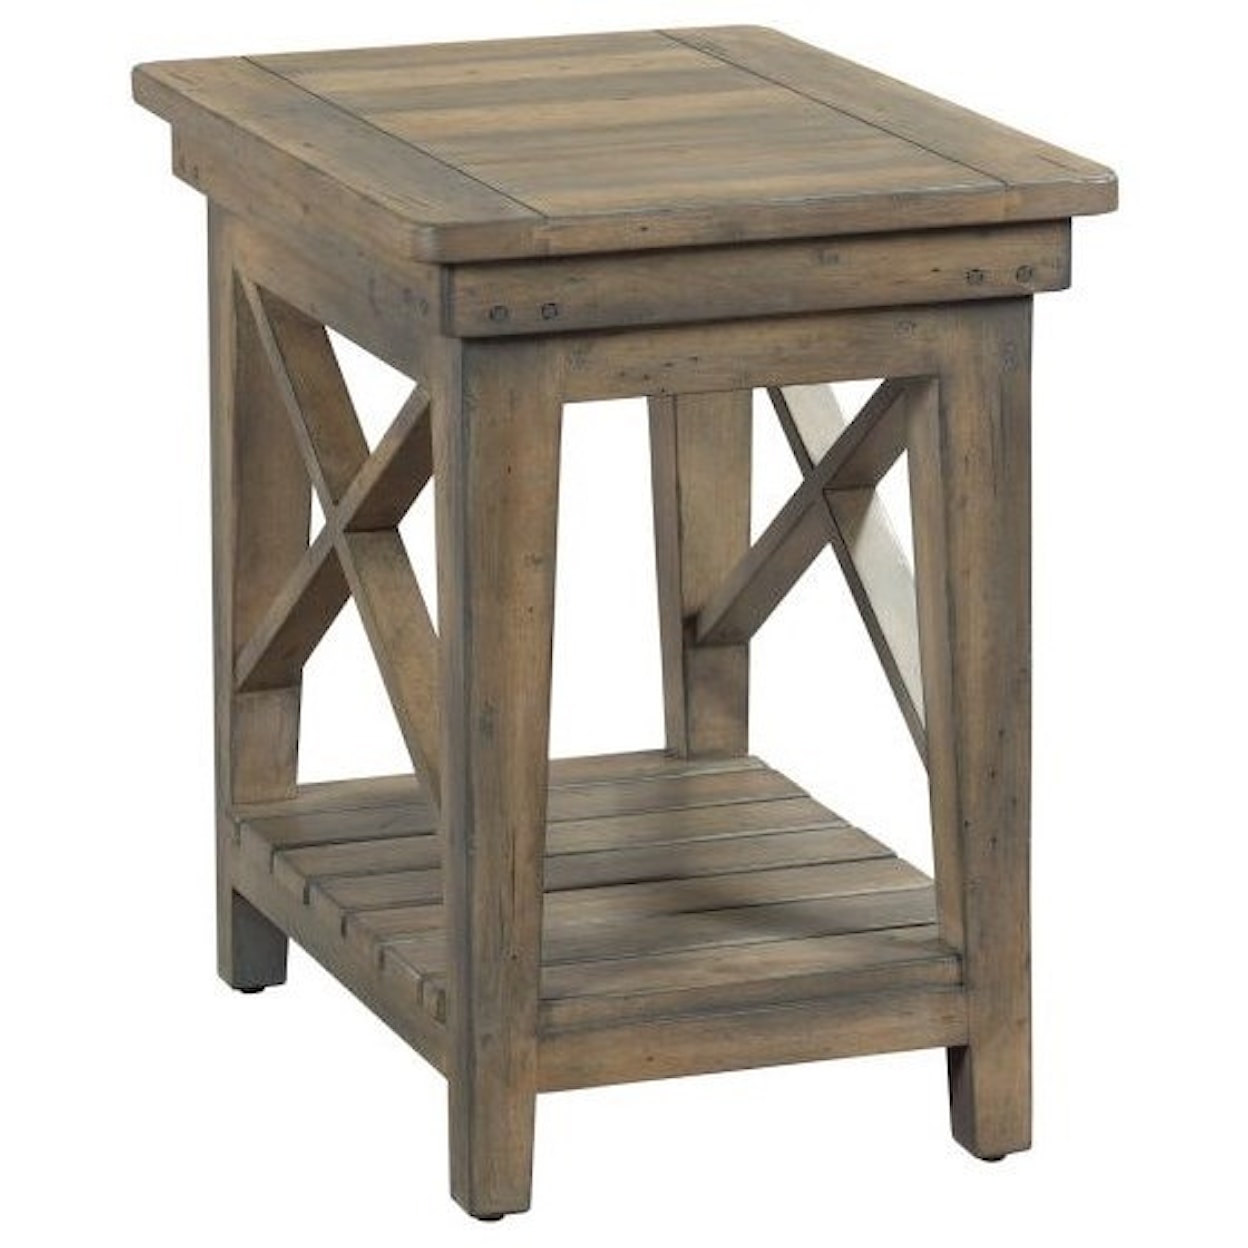 Kincaid Furniture Mill House Melody Chairside Table